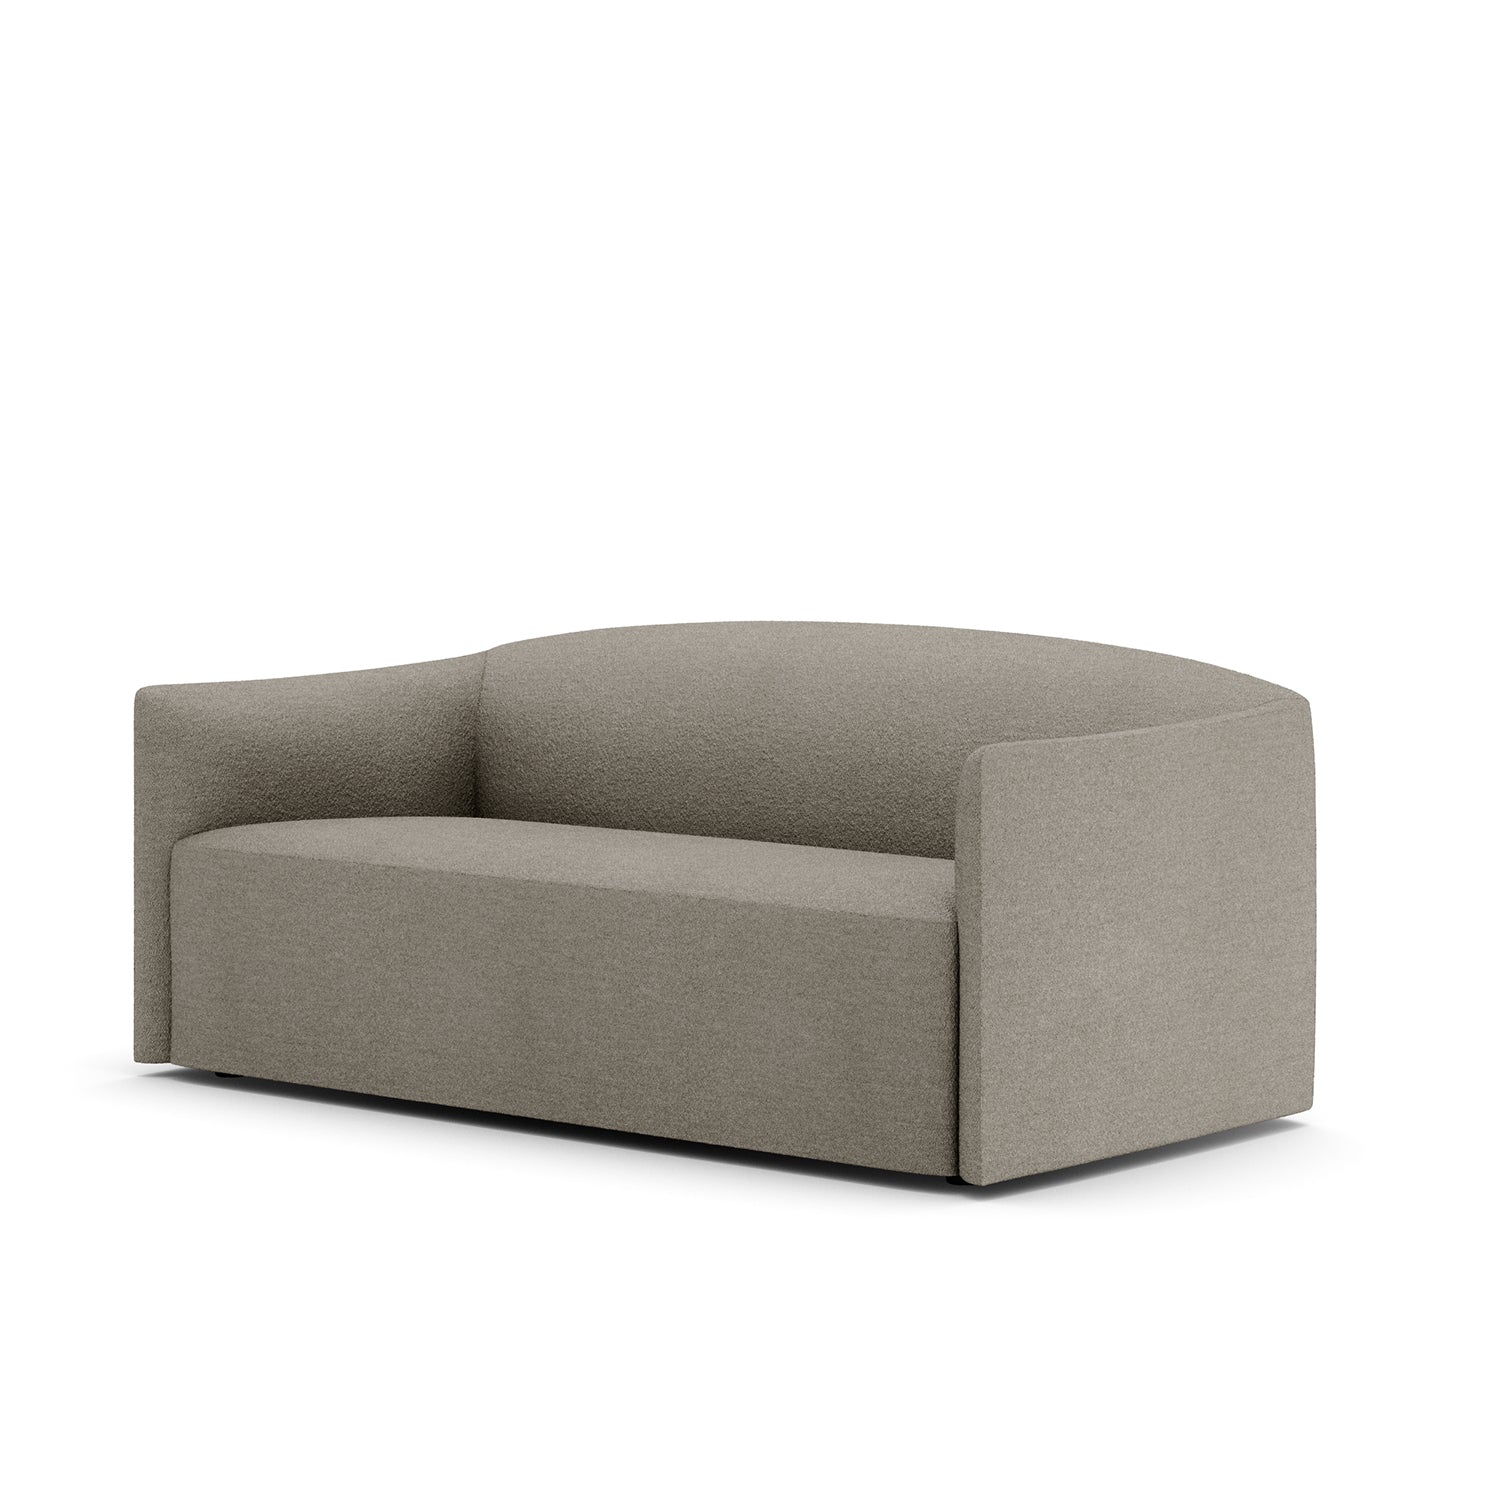 New Works Shore 2 Seater Sofa in taupe - side angle